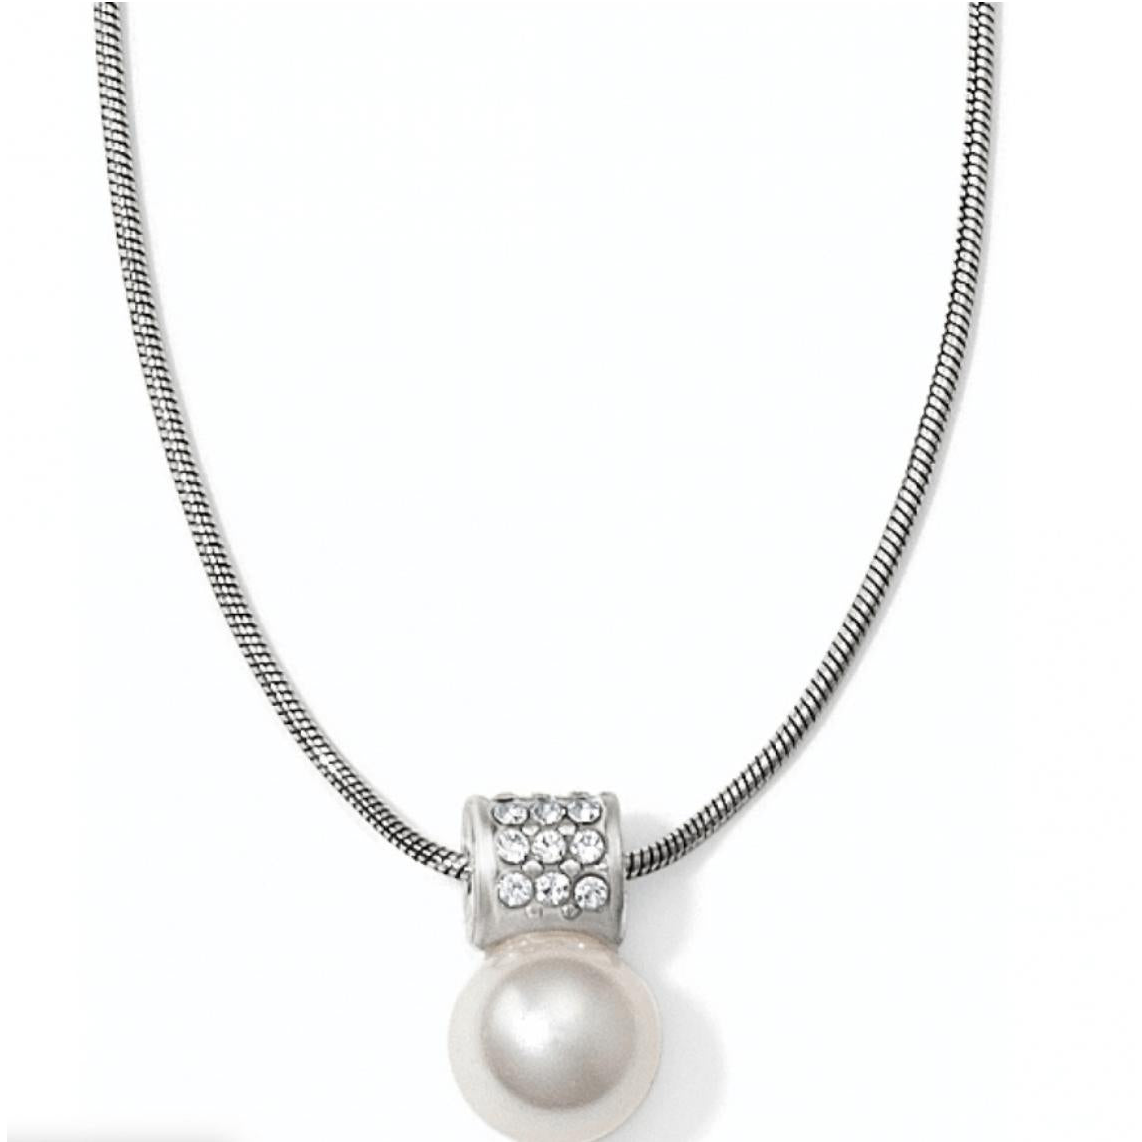 Meridian Petite Pearl Necklace - Zinnias Gift Boutique